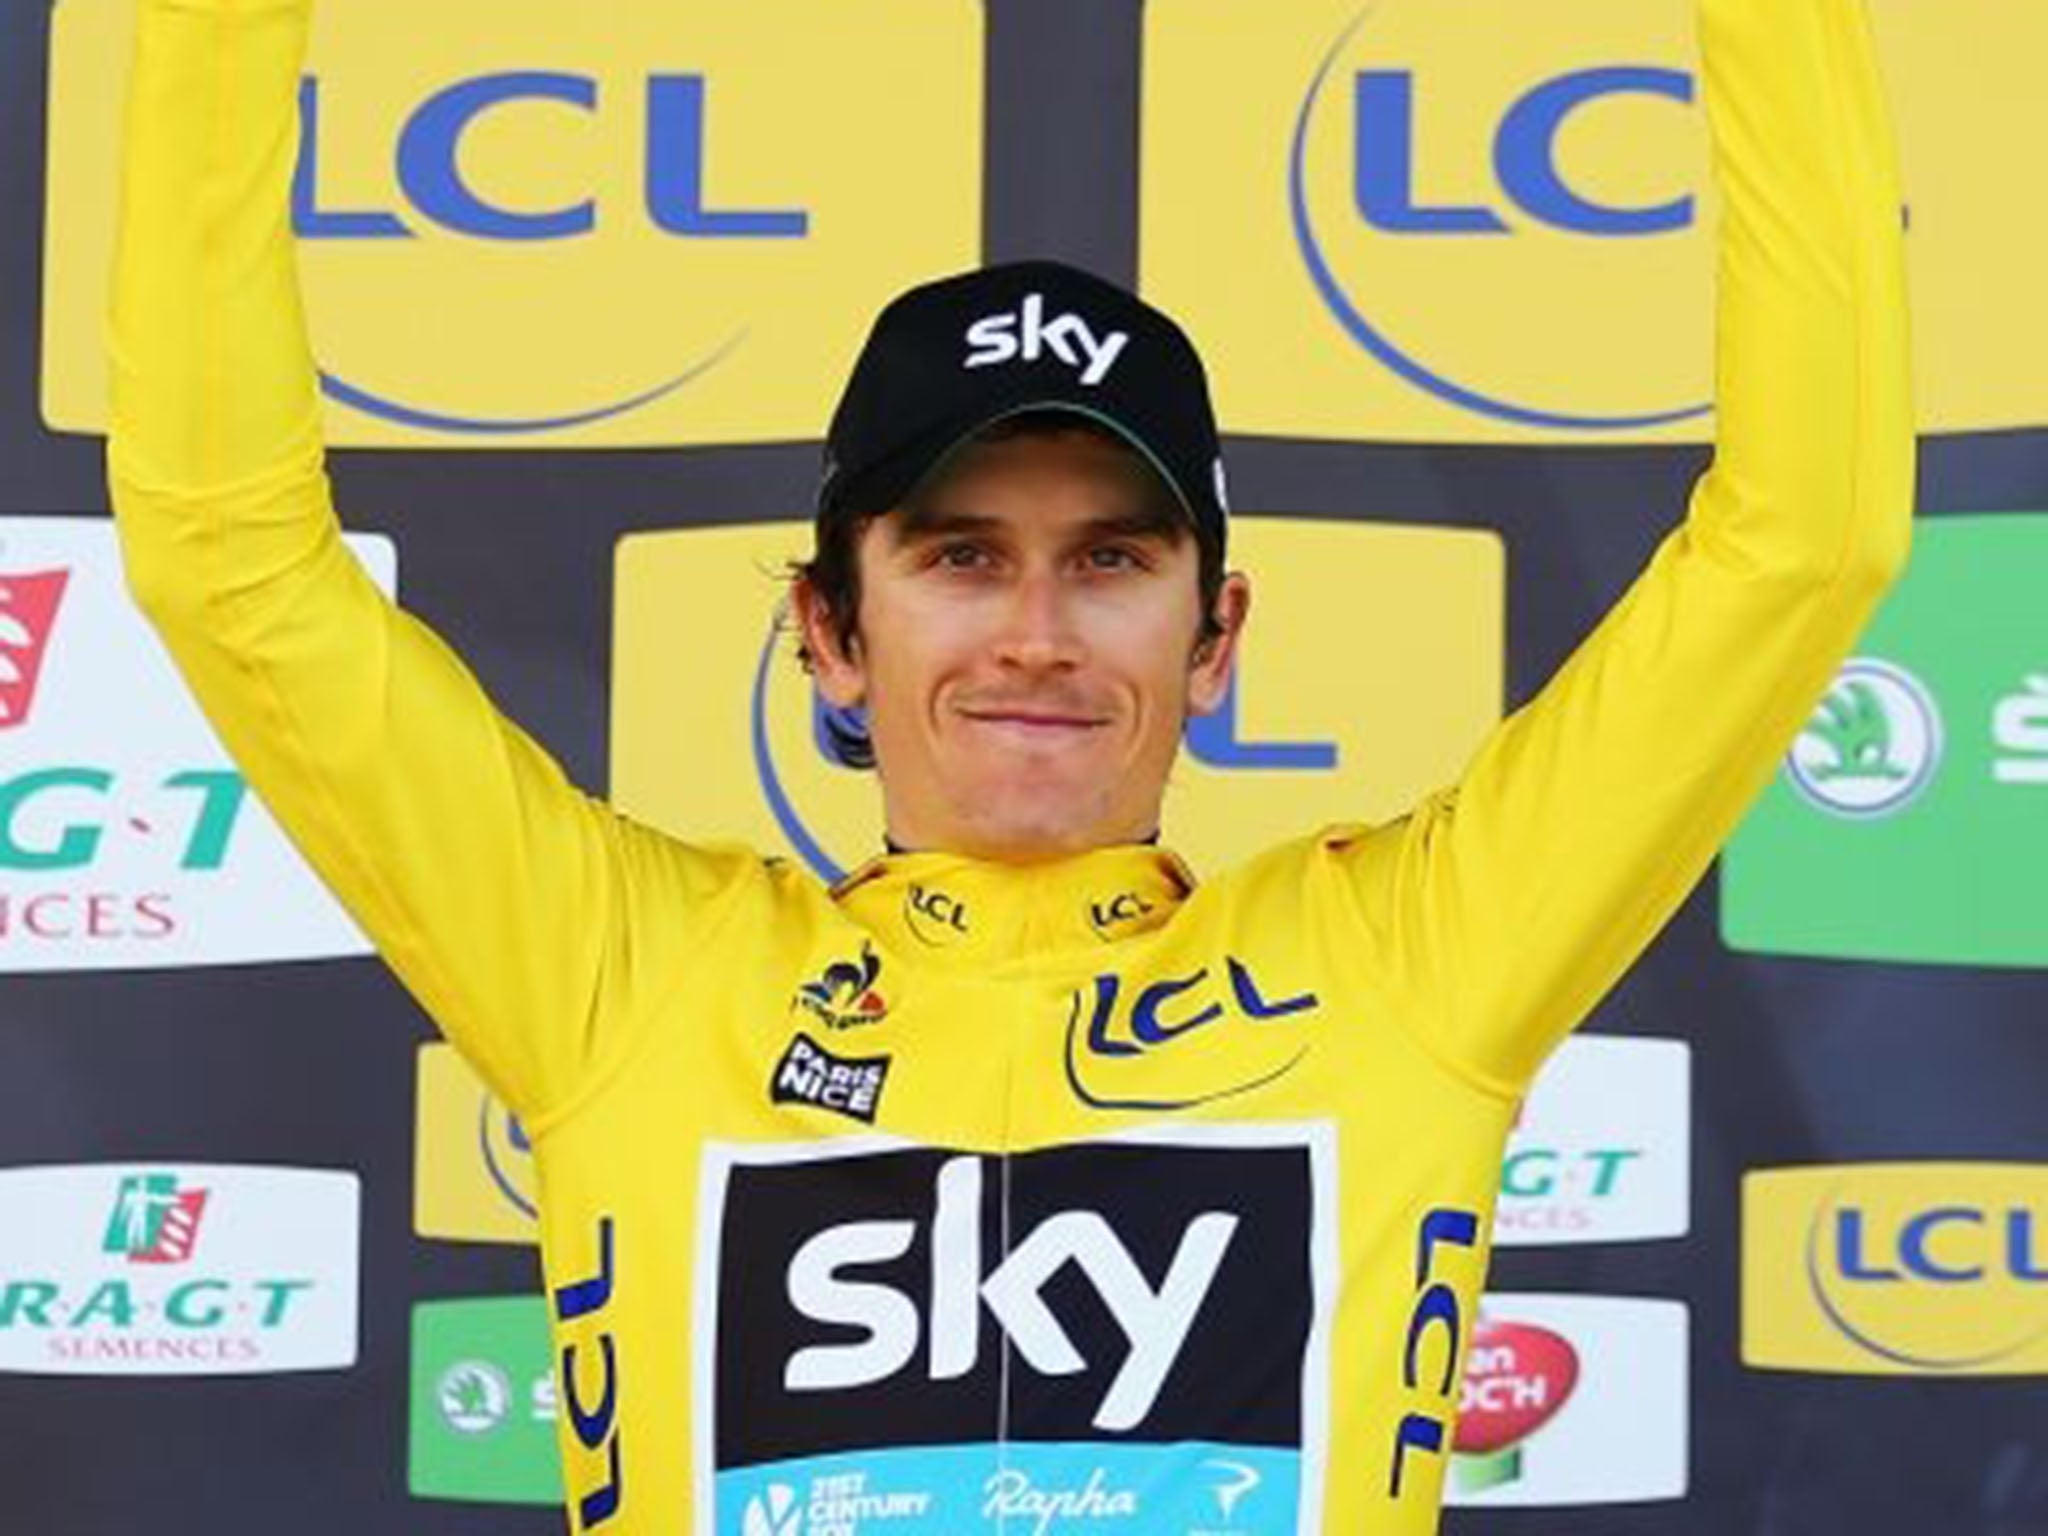 Geraint Thomas wore yellow in last year's race